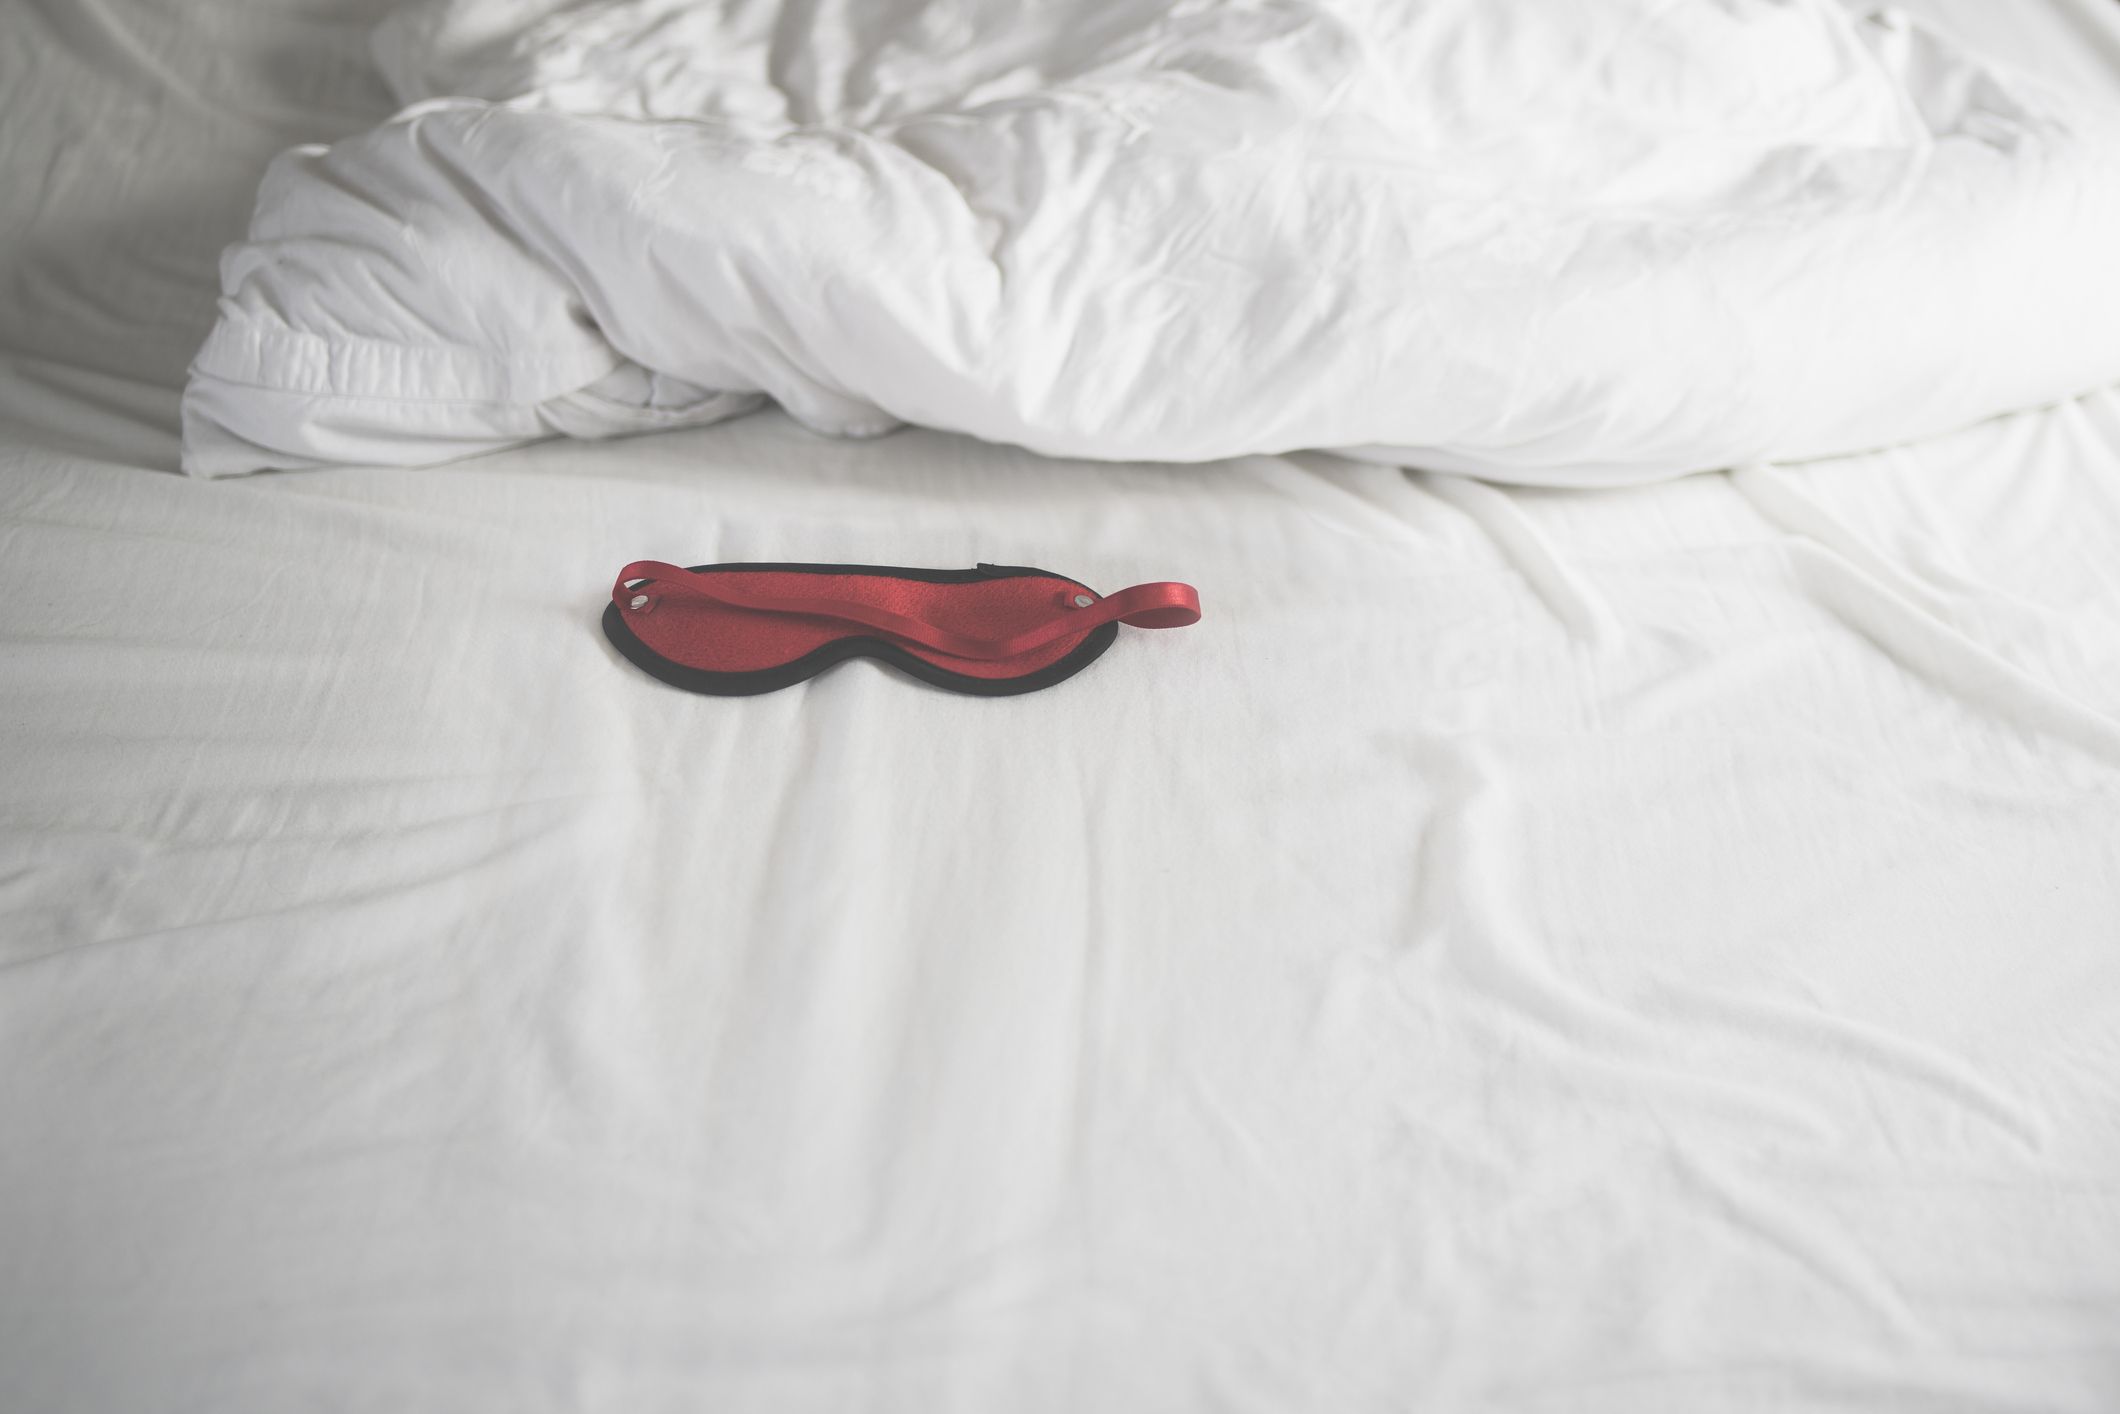 16 Amazing Sex Tricks He Wants to Try in Bed Tonight